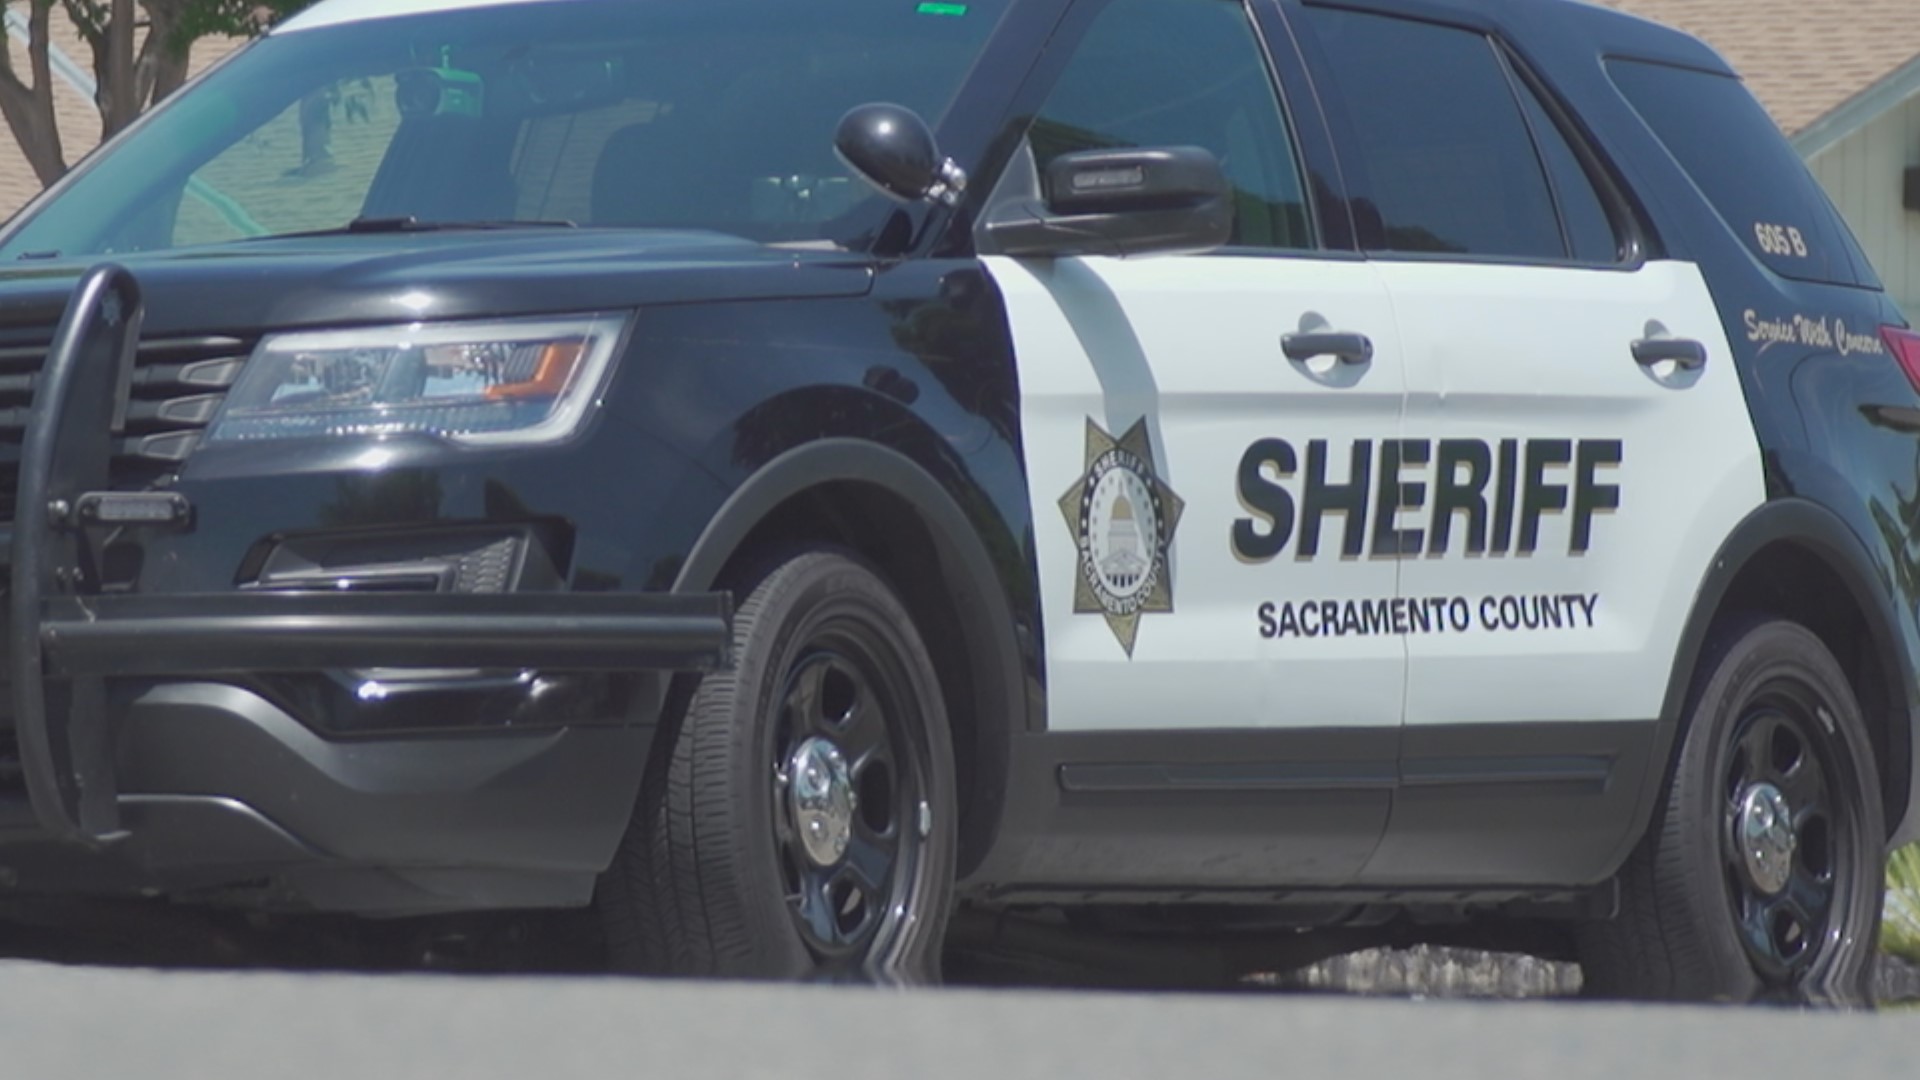 The Sacramento County Sheriff's Department is rolling out changes after it was reported the first California law enforcement officer died from the novel coronavirus.